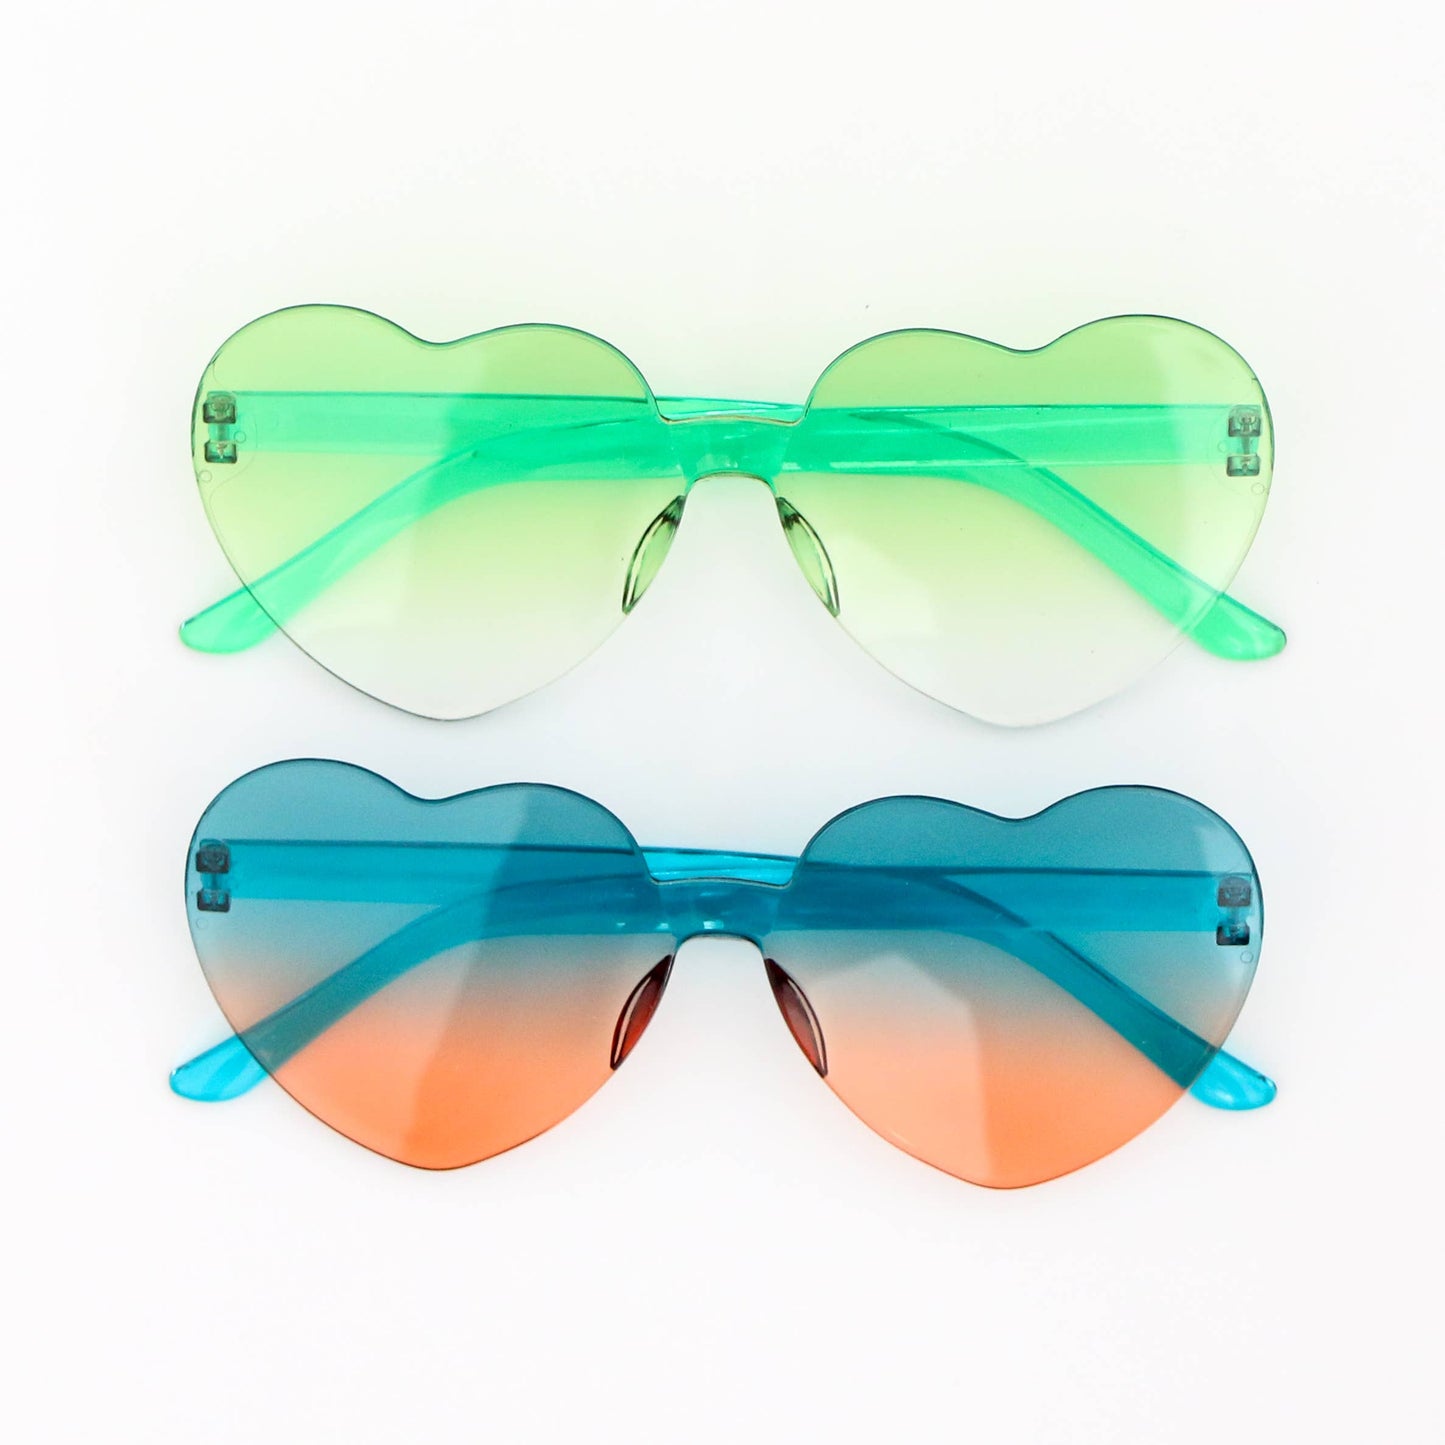 Lime green, Teal and orange ombré heart sunglasses